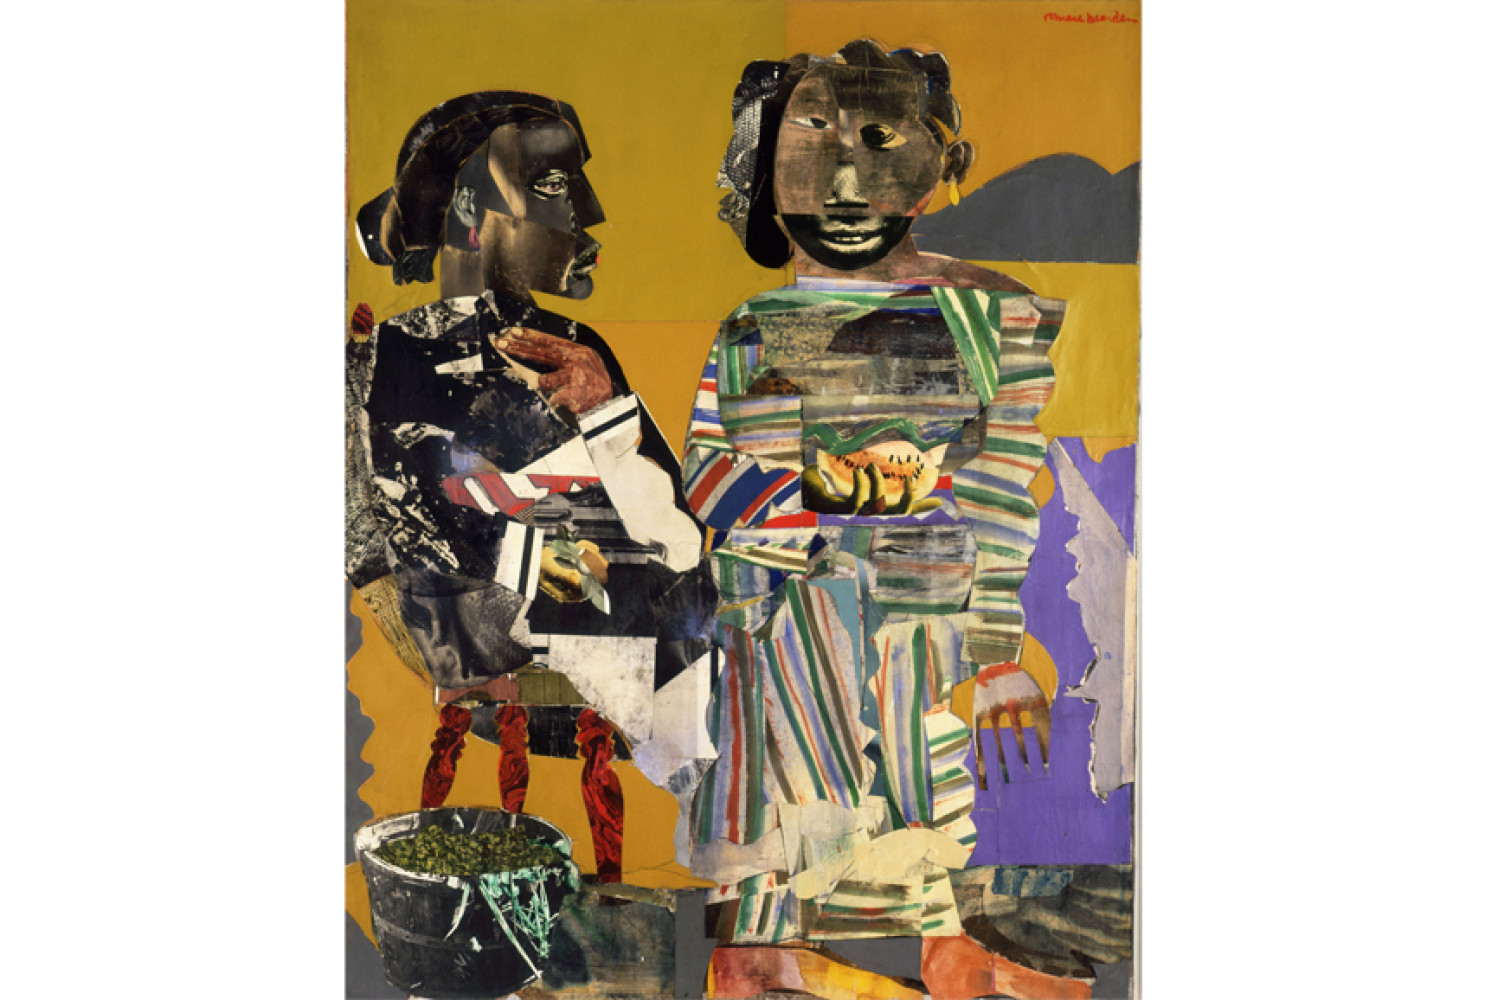 Romare Bearden, Melon Season, 1967. Mixed media on canvas, 56 1/2 x 44 1/2 inches. Collection Neuberger Museum of Art, Purchase College, SUNY, Gift of Roy R. Neuberger, 1976.26.45 © VAGA at Artists Rights Society(ARS), NY